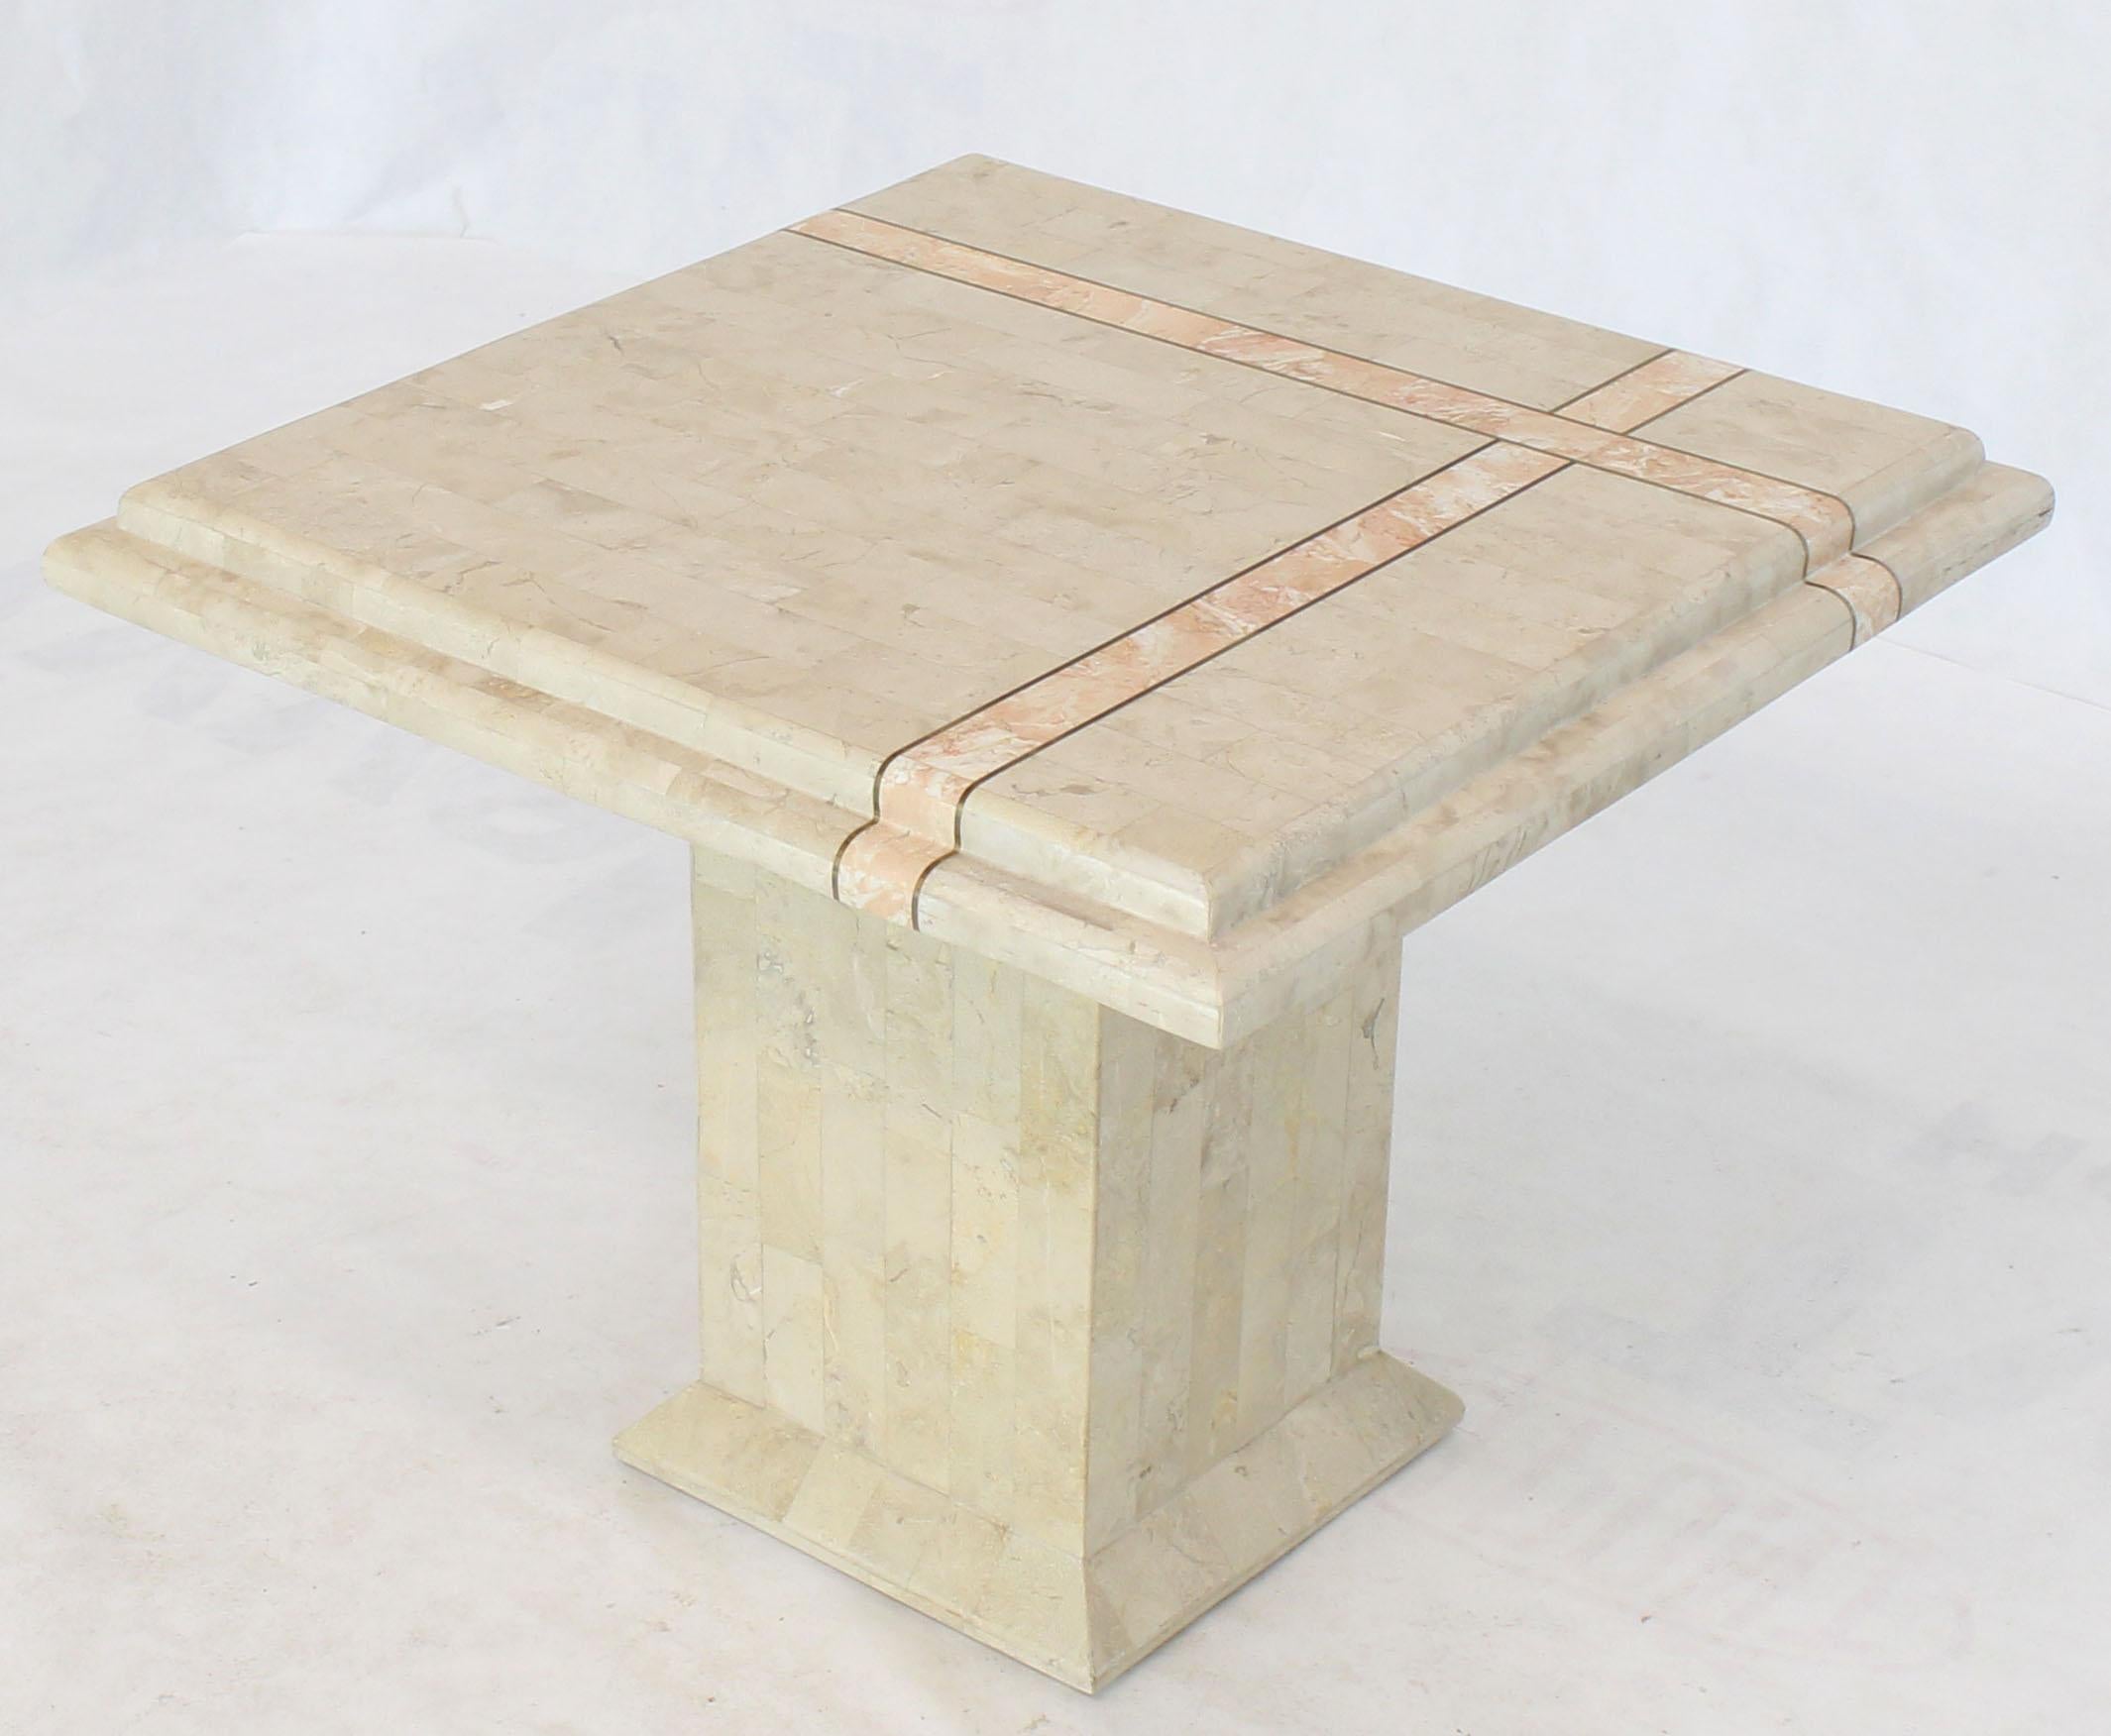 Inlay Pair of Tessellated Stone Tile Square Pedestal Shape End Side Tables Stands